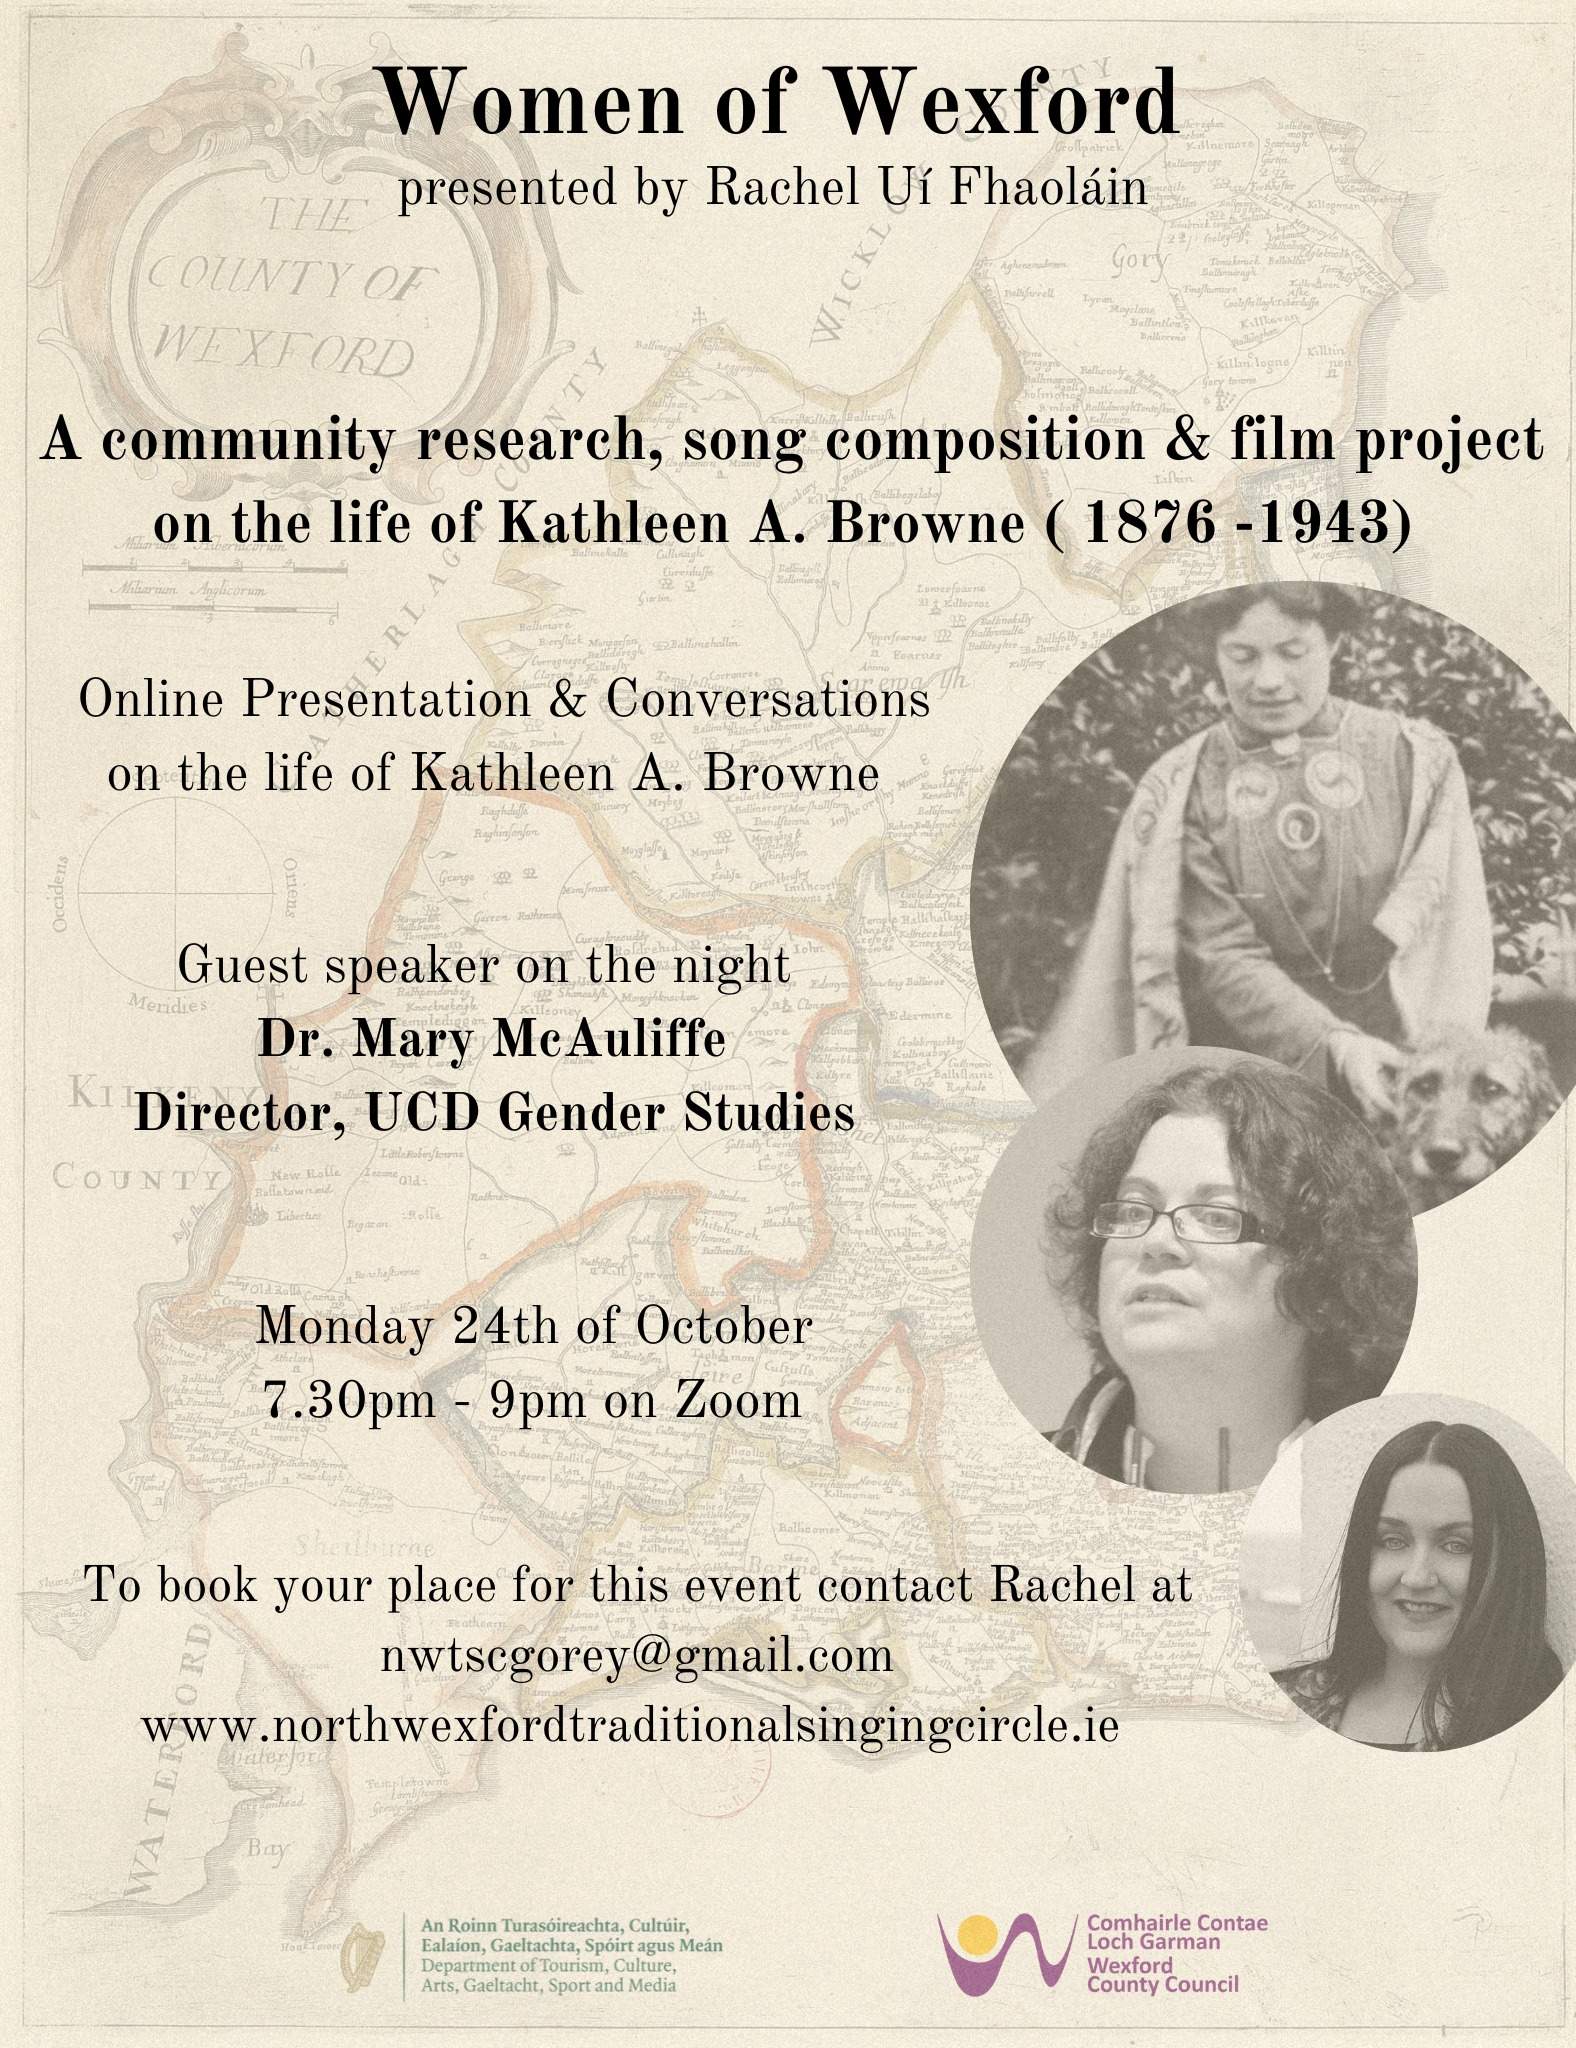 Women of Wexford | Kathleen A. Browne | A Community Research, Song Composition & Film Project...